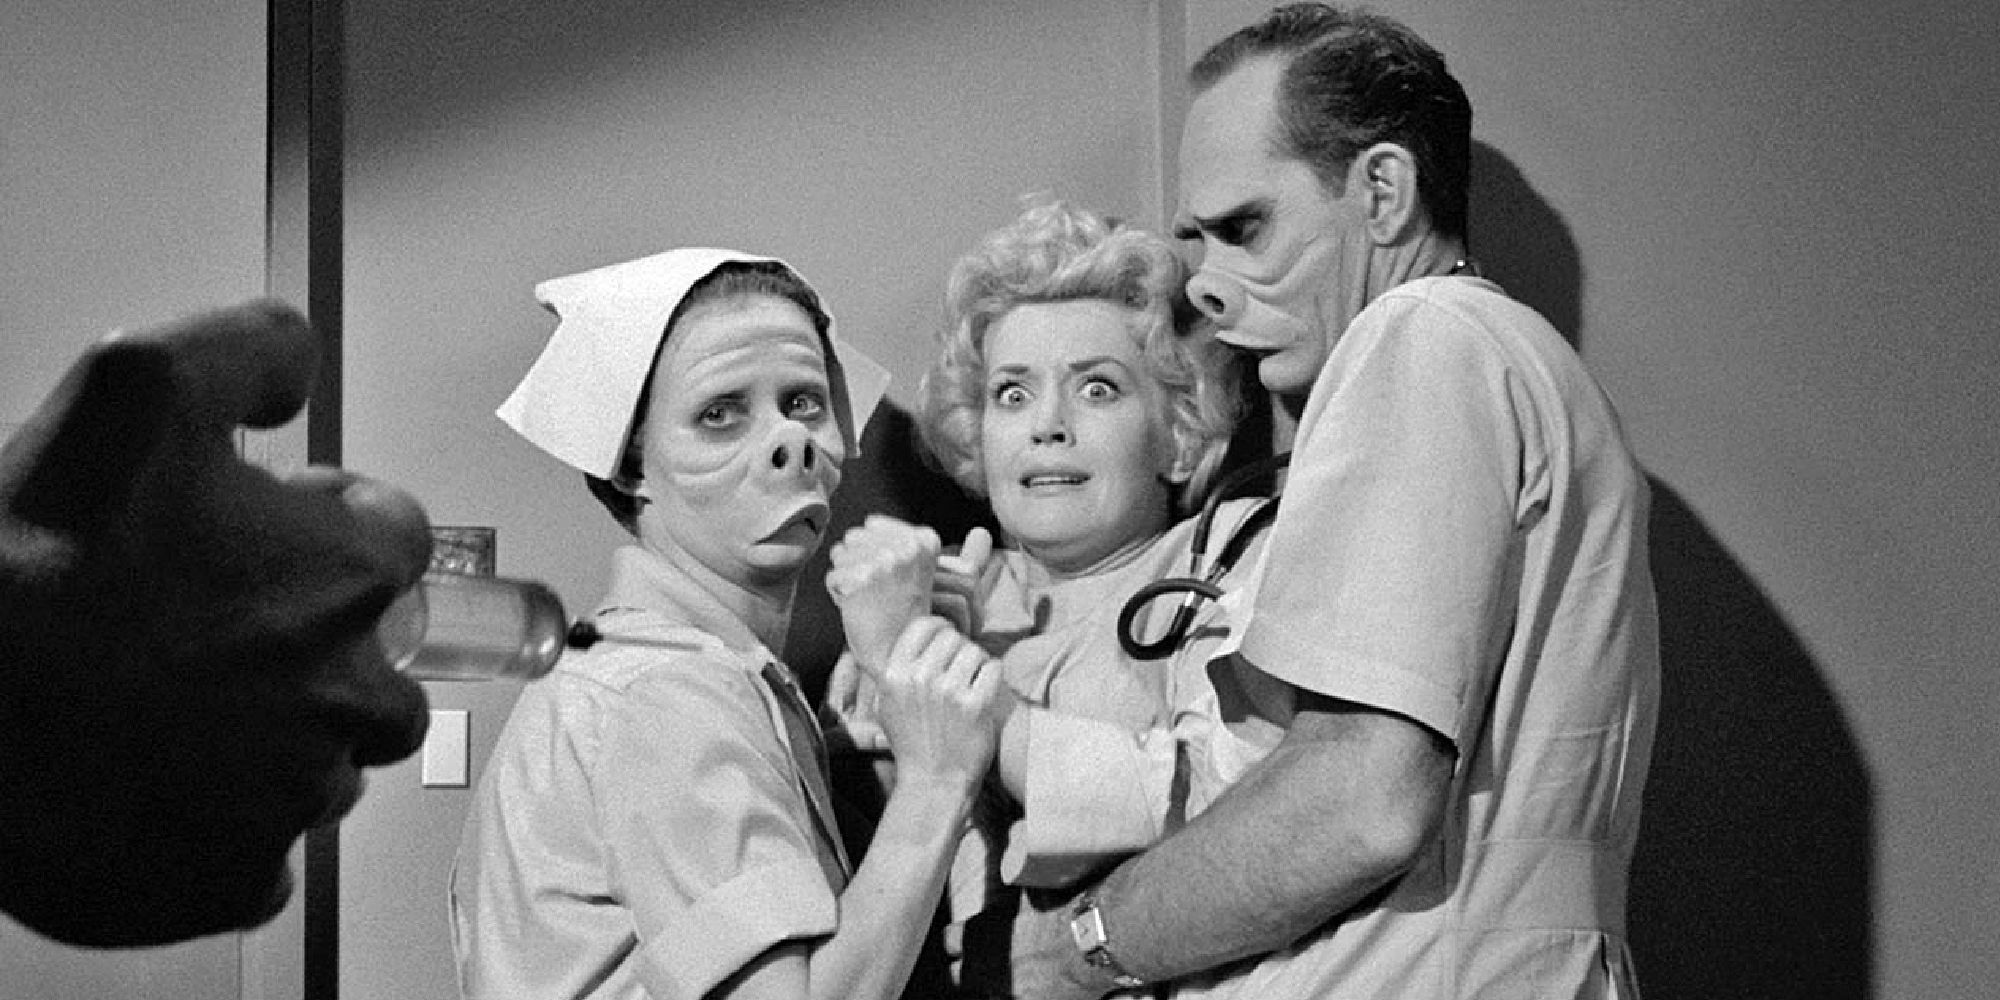 Two doctors with disfigured faces holding down a patient while someone approaches her with a syringe in The Twilight Zone